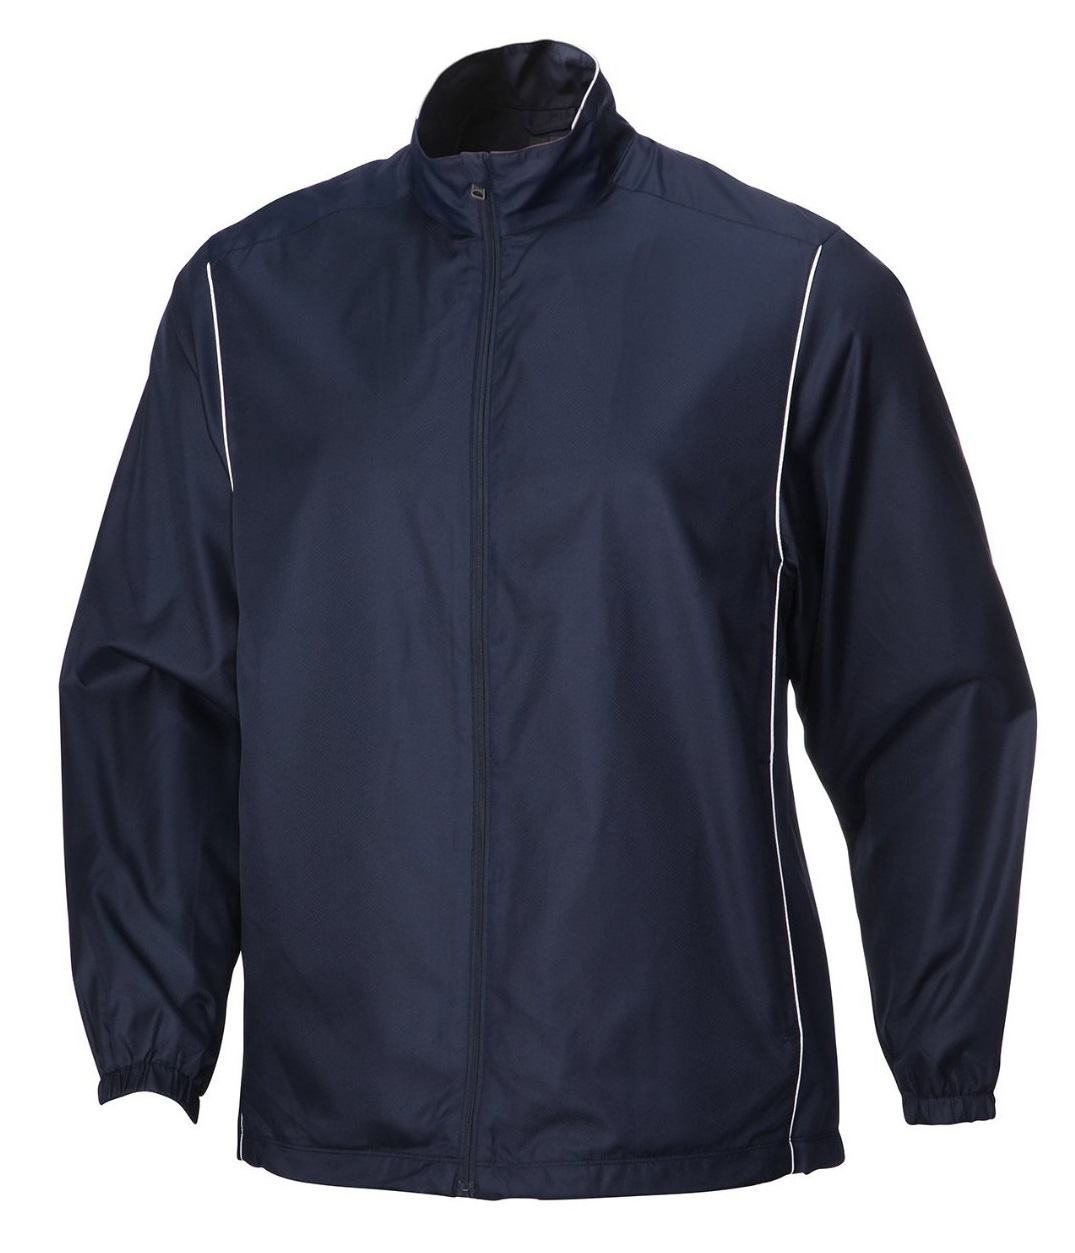 Water Resistant Performance Golf Jackets